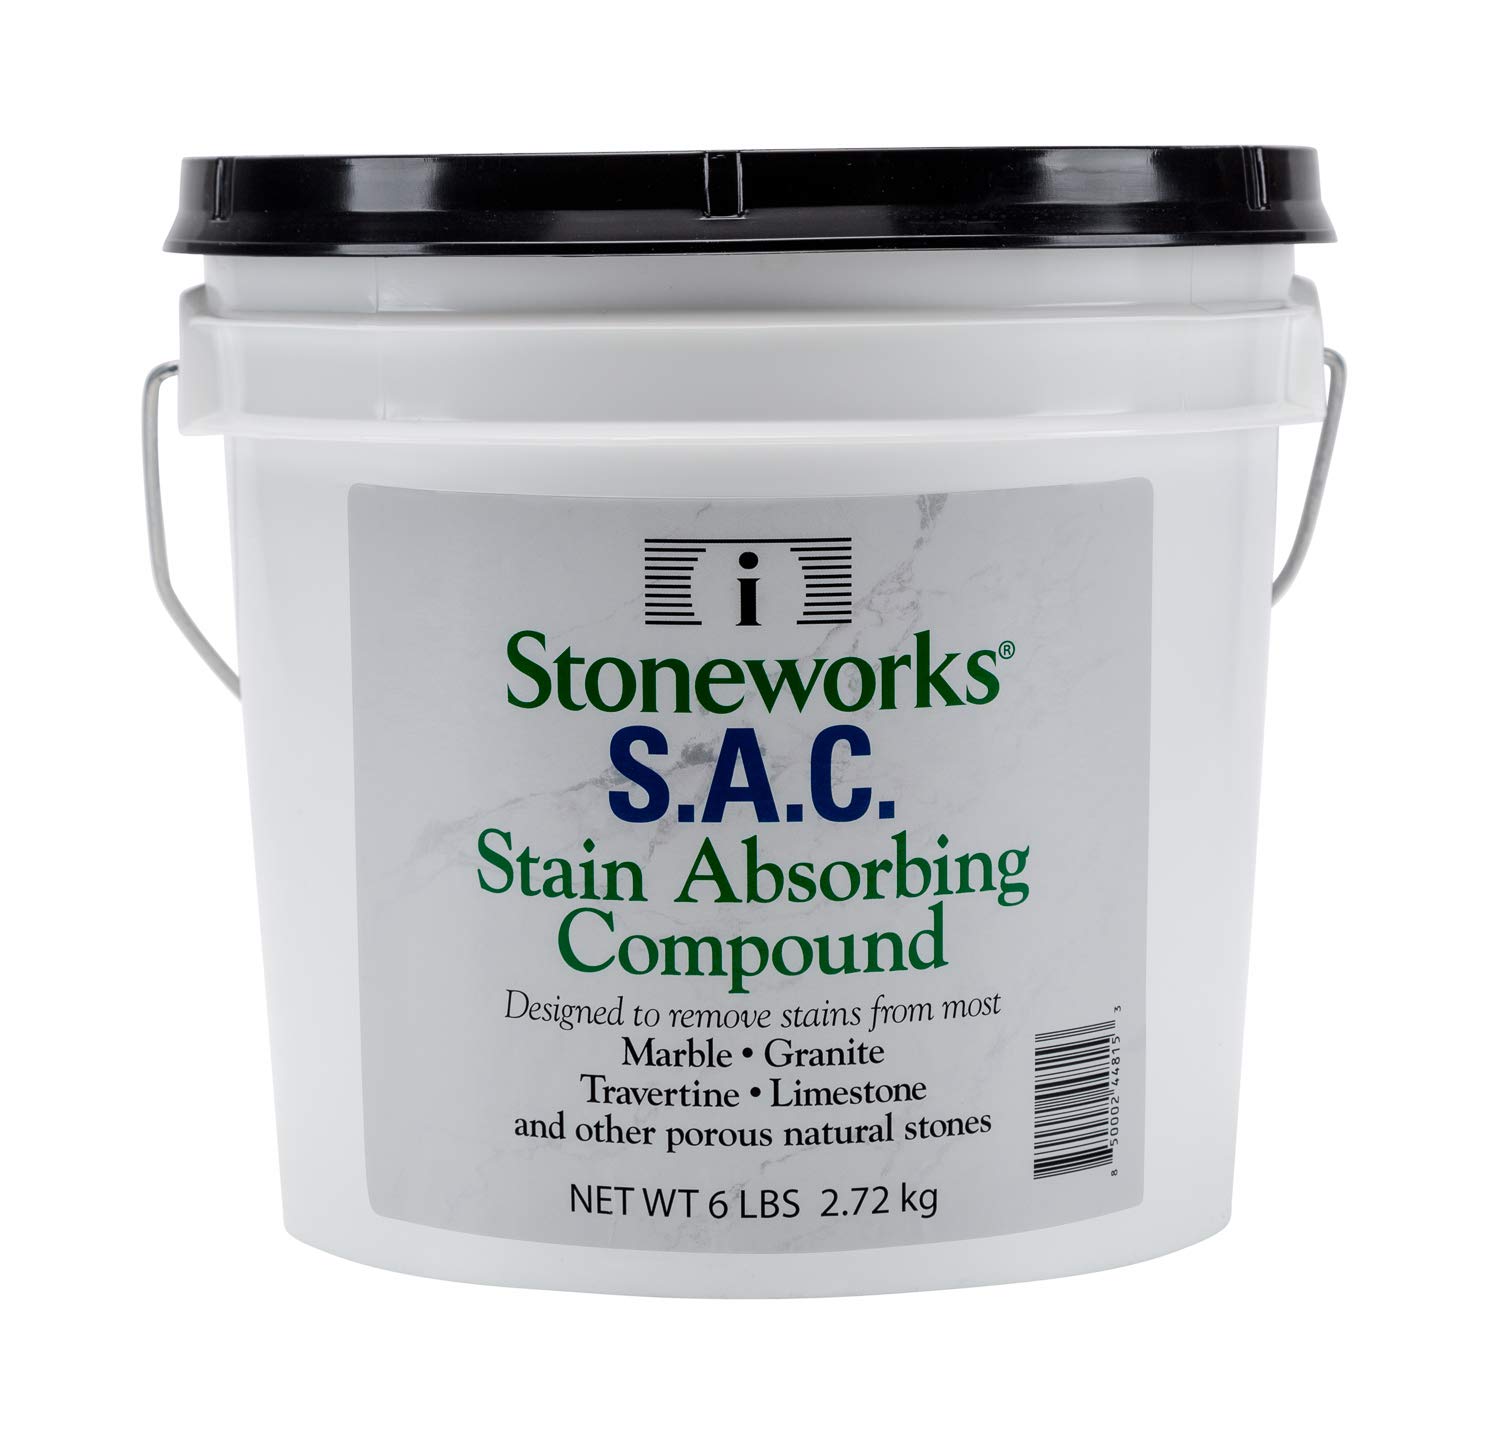 SAC Poultice Powder (6 Lb) Designed to Eliminate Stains Such as Coffee, Tea, Oil, Grease, Butter and Other Non-Acid Stains from Marble, Granite, Li...